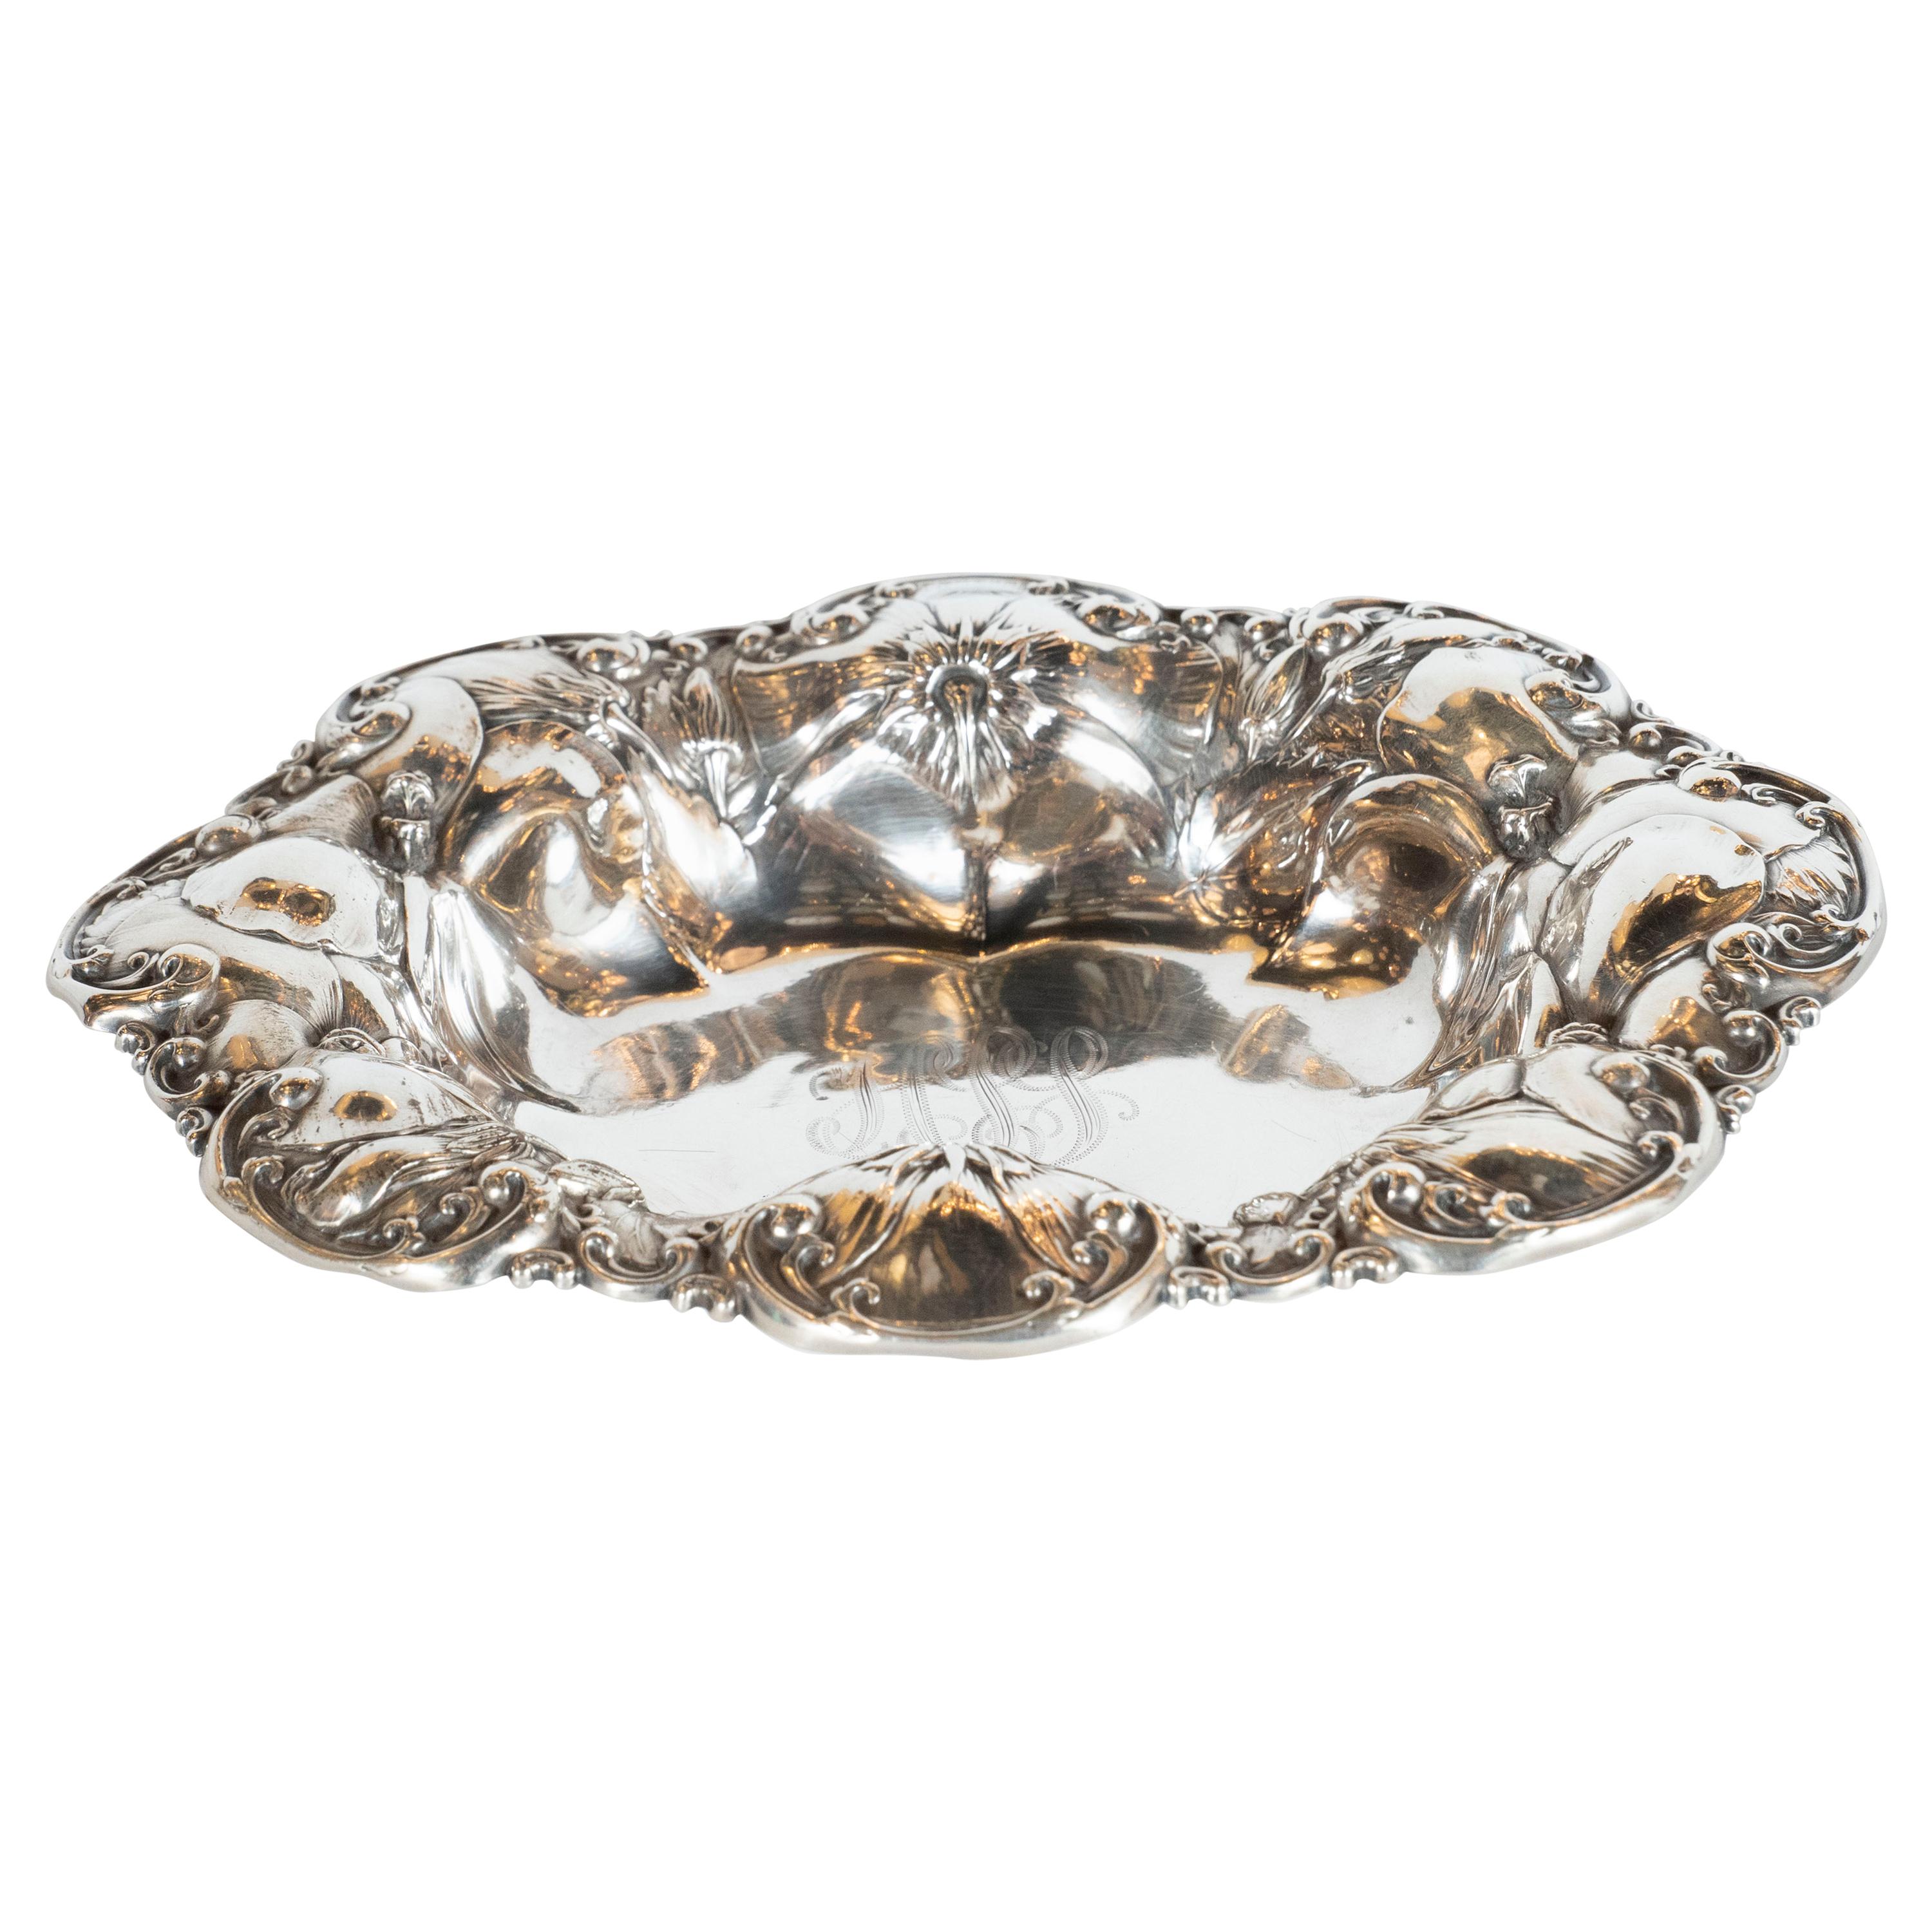 This stunning and sculptural antique decorative bowl was realized in England, circa 1900. It features a scalloped border with an abundance of stylized morning glory flowers at different stages of blooming. The floral forms are overlaid on top of one